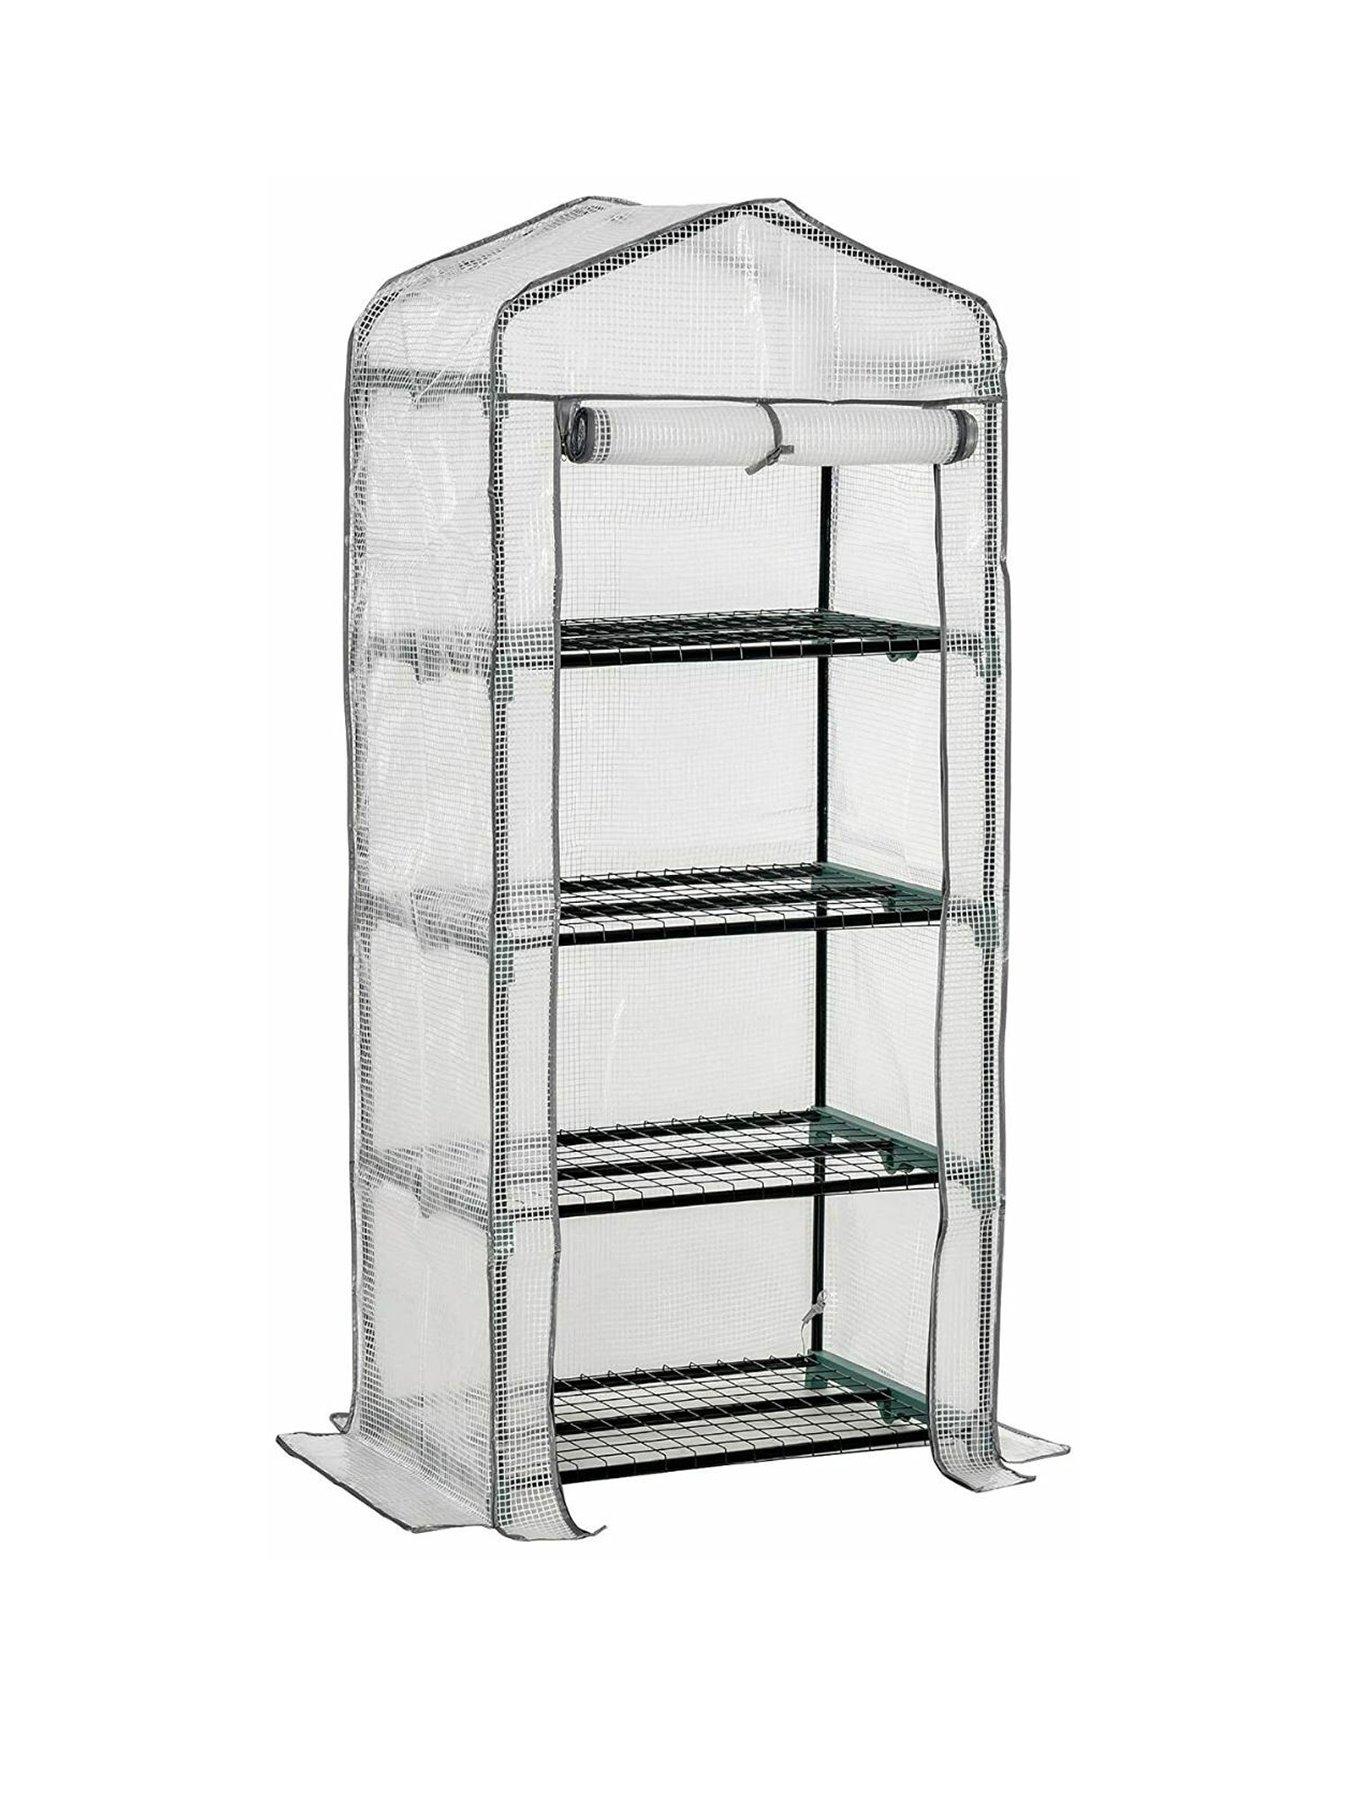 Outsunny Portable 4-Tier Mini Greenhouse Plant Grow House Shed W/ Clear Cover Outdoor